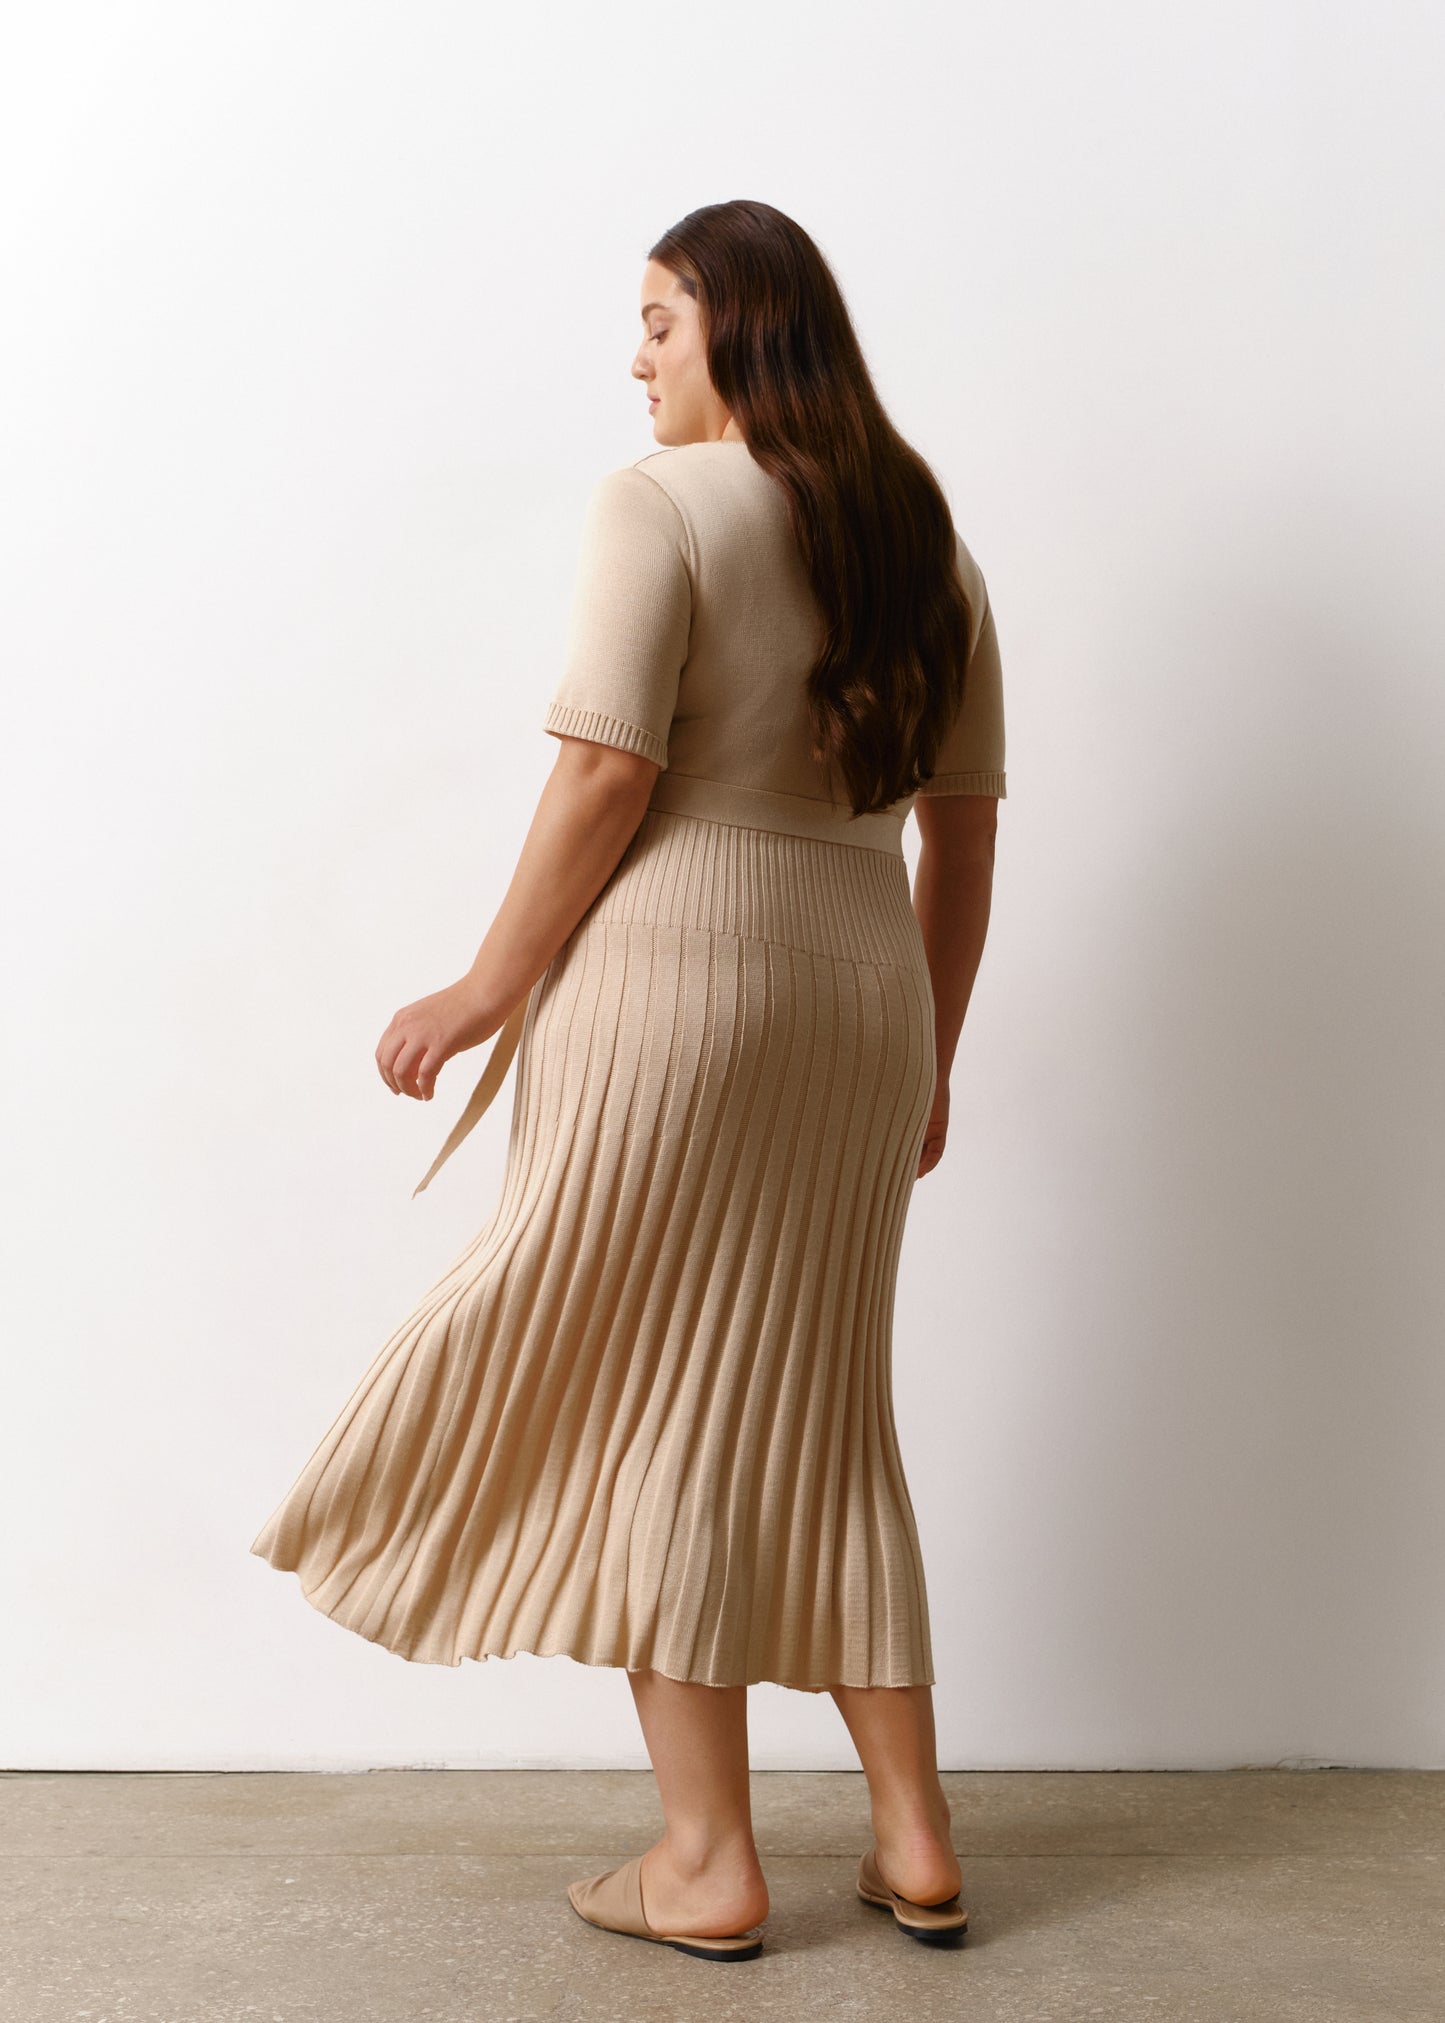 Knitted Round Neck Pleated Skirt Midi Dress